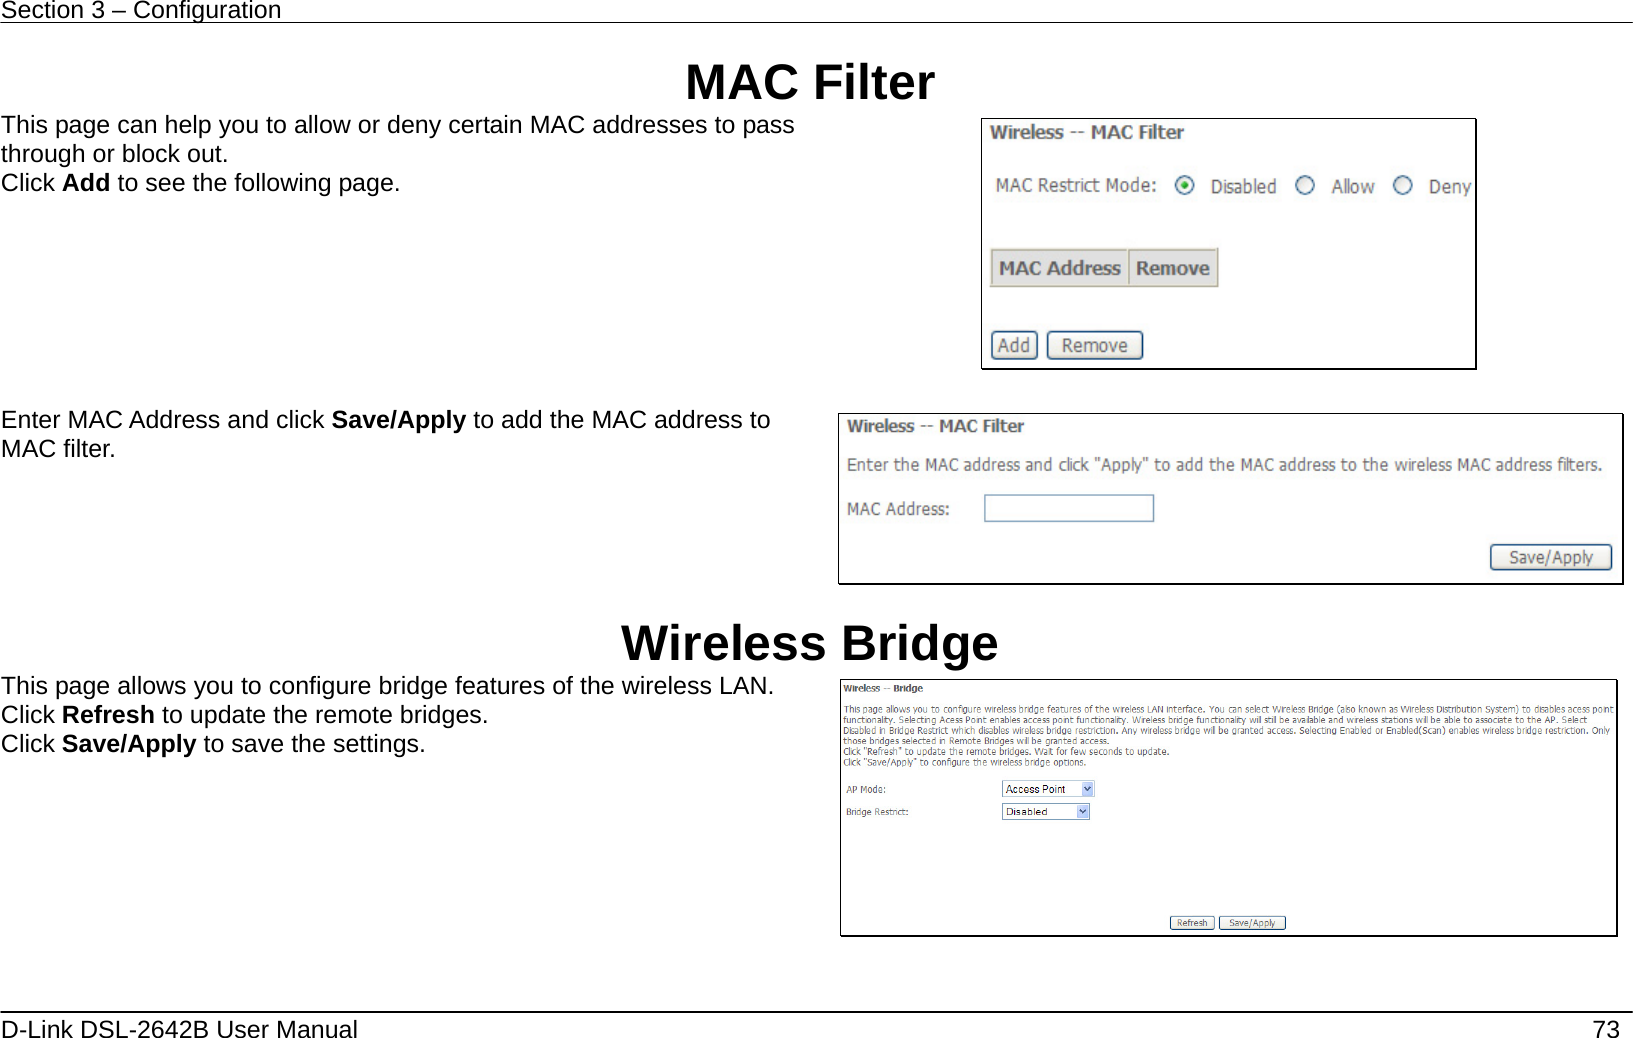 Section 3 – Configuration   D-Link DSL-2642B User Manual    73 MAC Filter This page can help you to allow or deny certain MAC addresses to pass through or block out. Click Add to see the following page.    Enter MAC Address and click Save/Apply to add the MAC address to MAC filter.   Wireless Bridge This page allows you to configure bridge features of the wireless LAN. Click Refresh to update the remote bridges. Click Save/Apply to save the settings.     